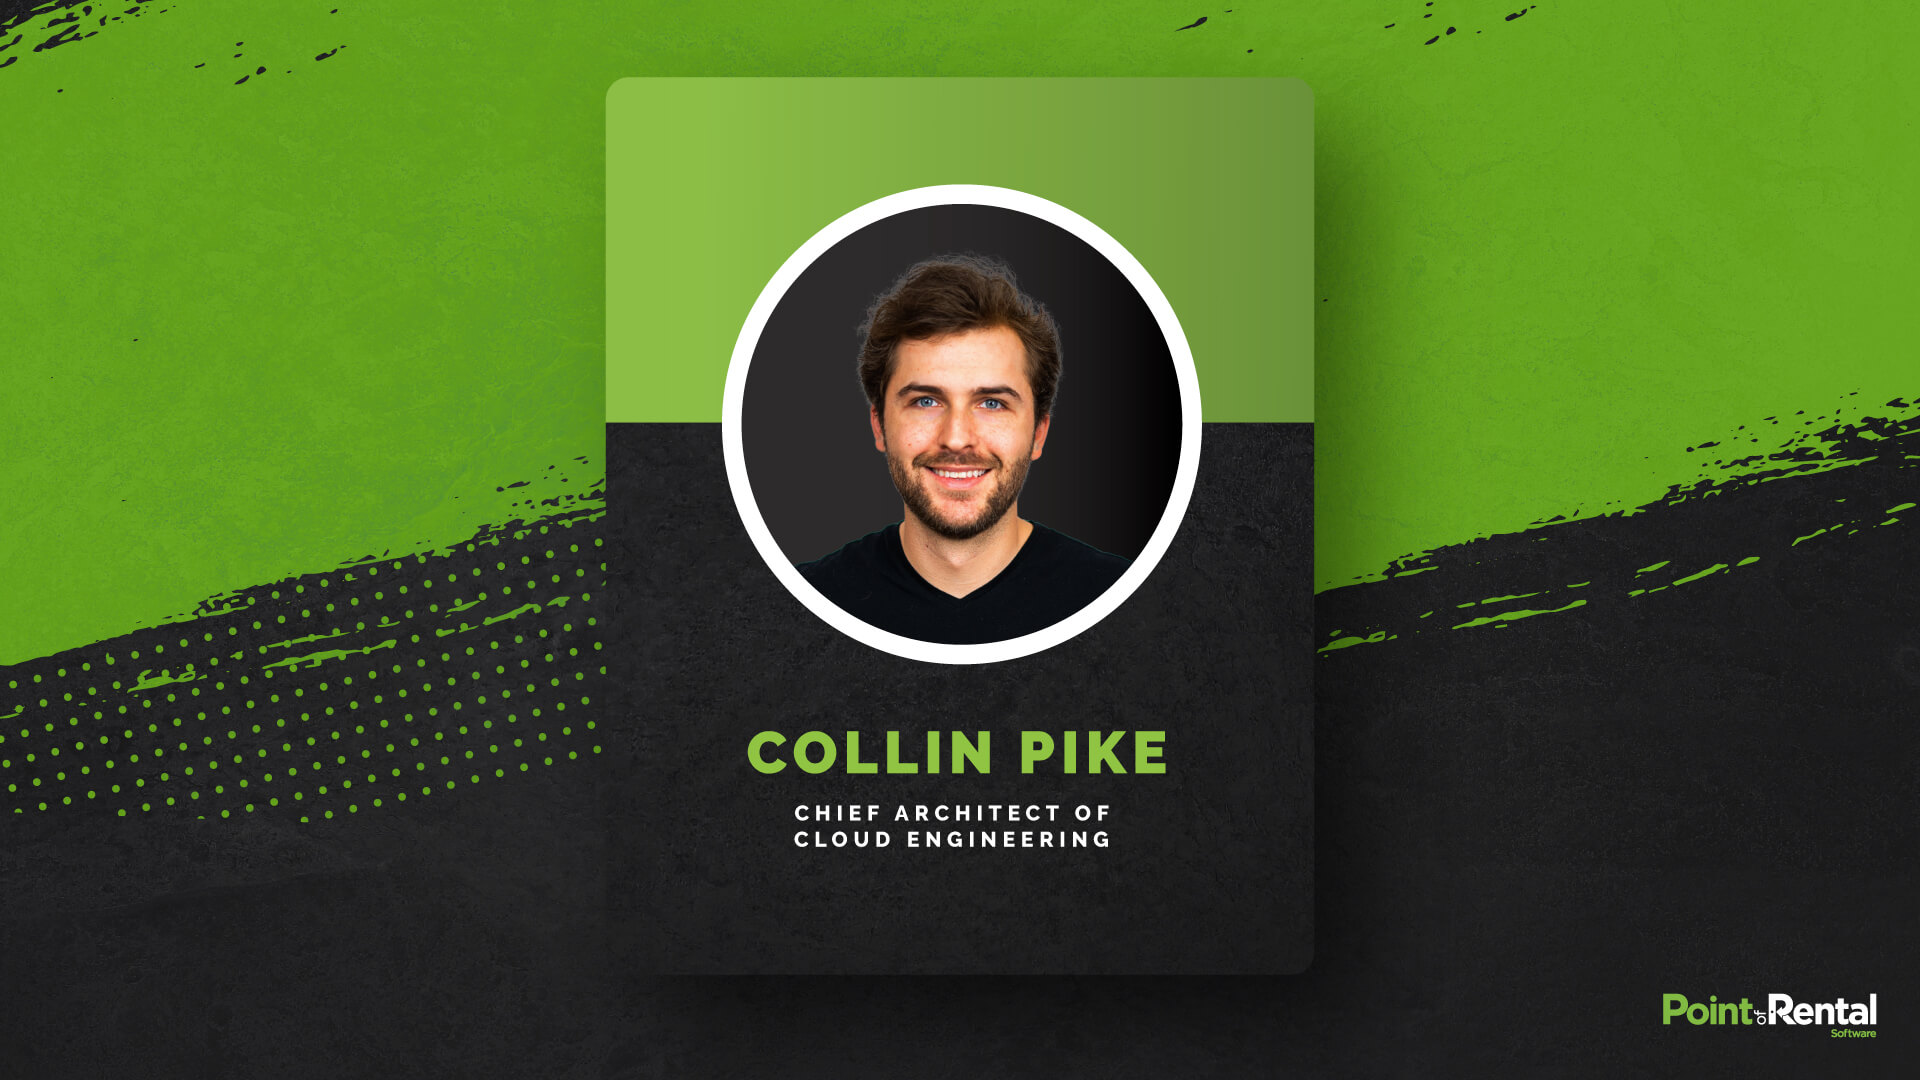 Point of Rental's new Cloud Engineering team's chief architect, Collin Pike